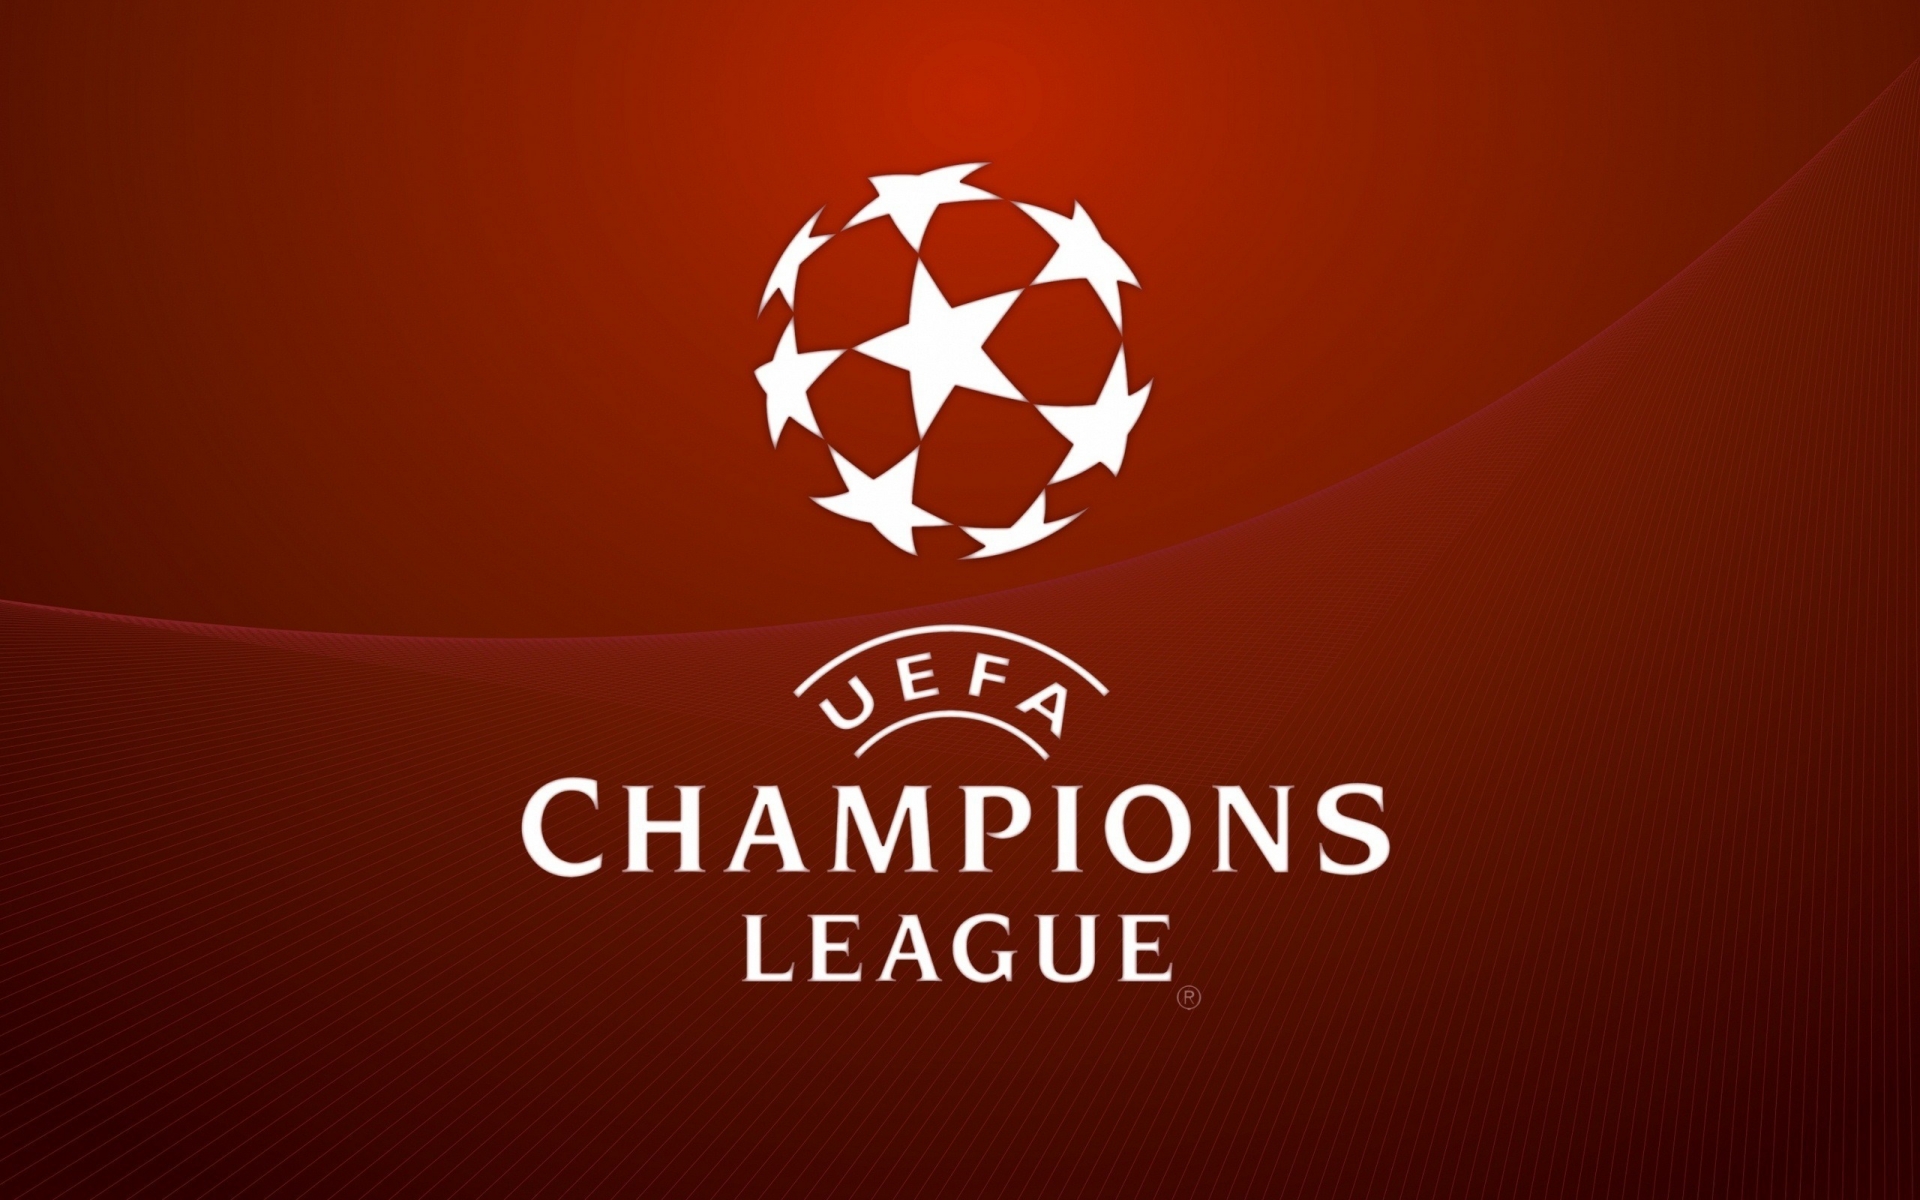 Champions League logo for 1920 x 1200 widescreen resolution